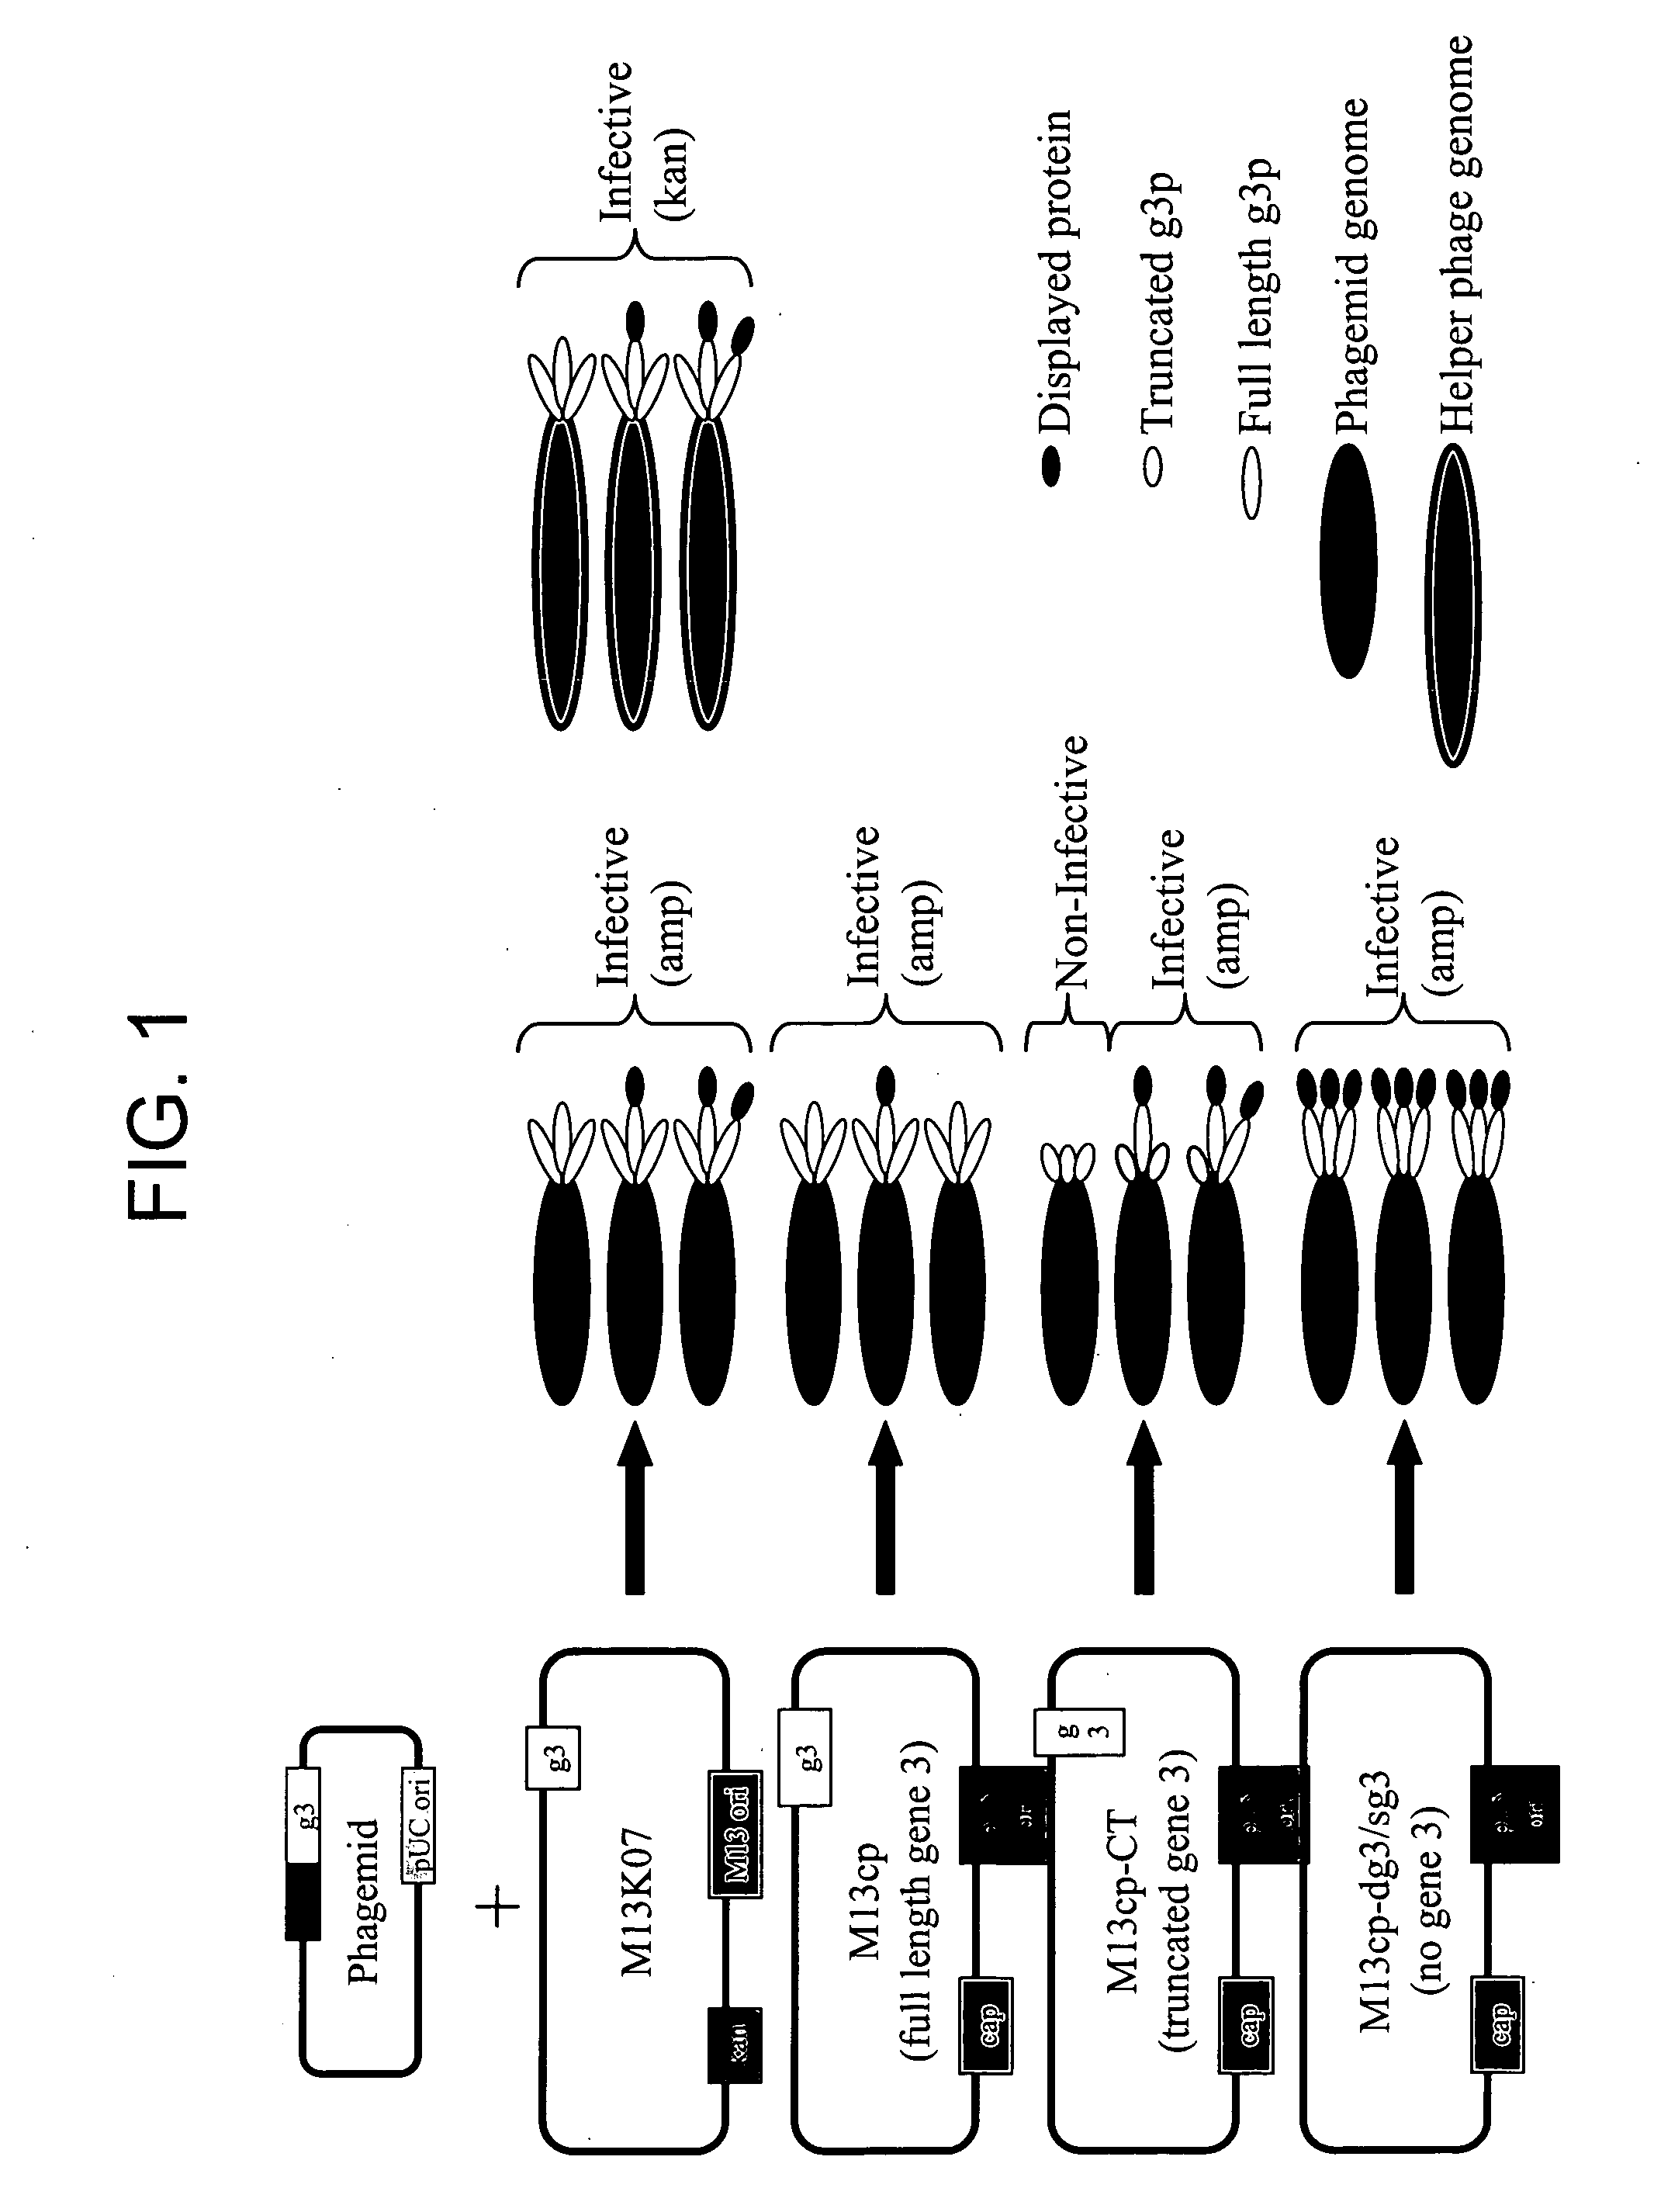 Plasmids and packaging cell lines for use in phage display